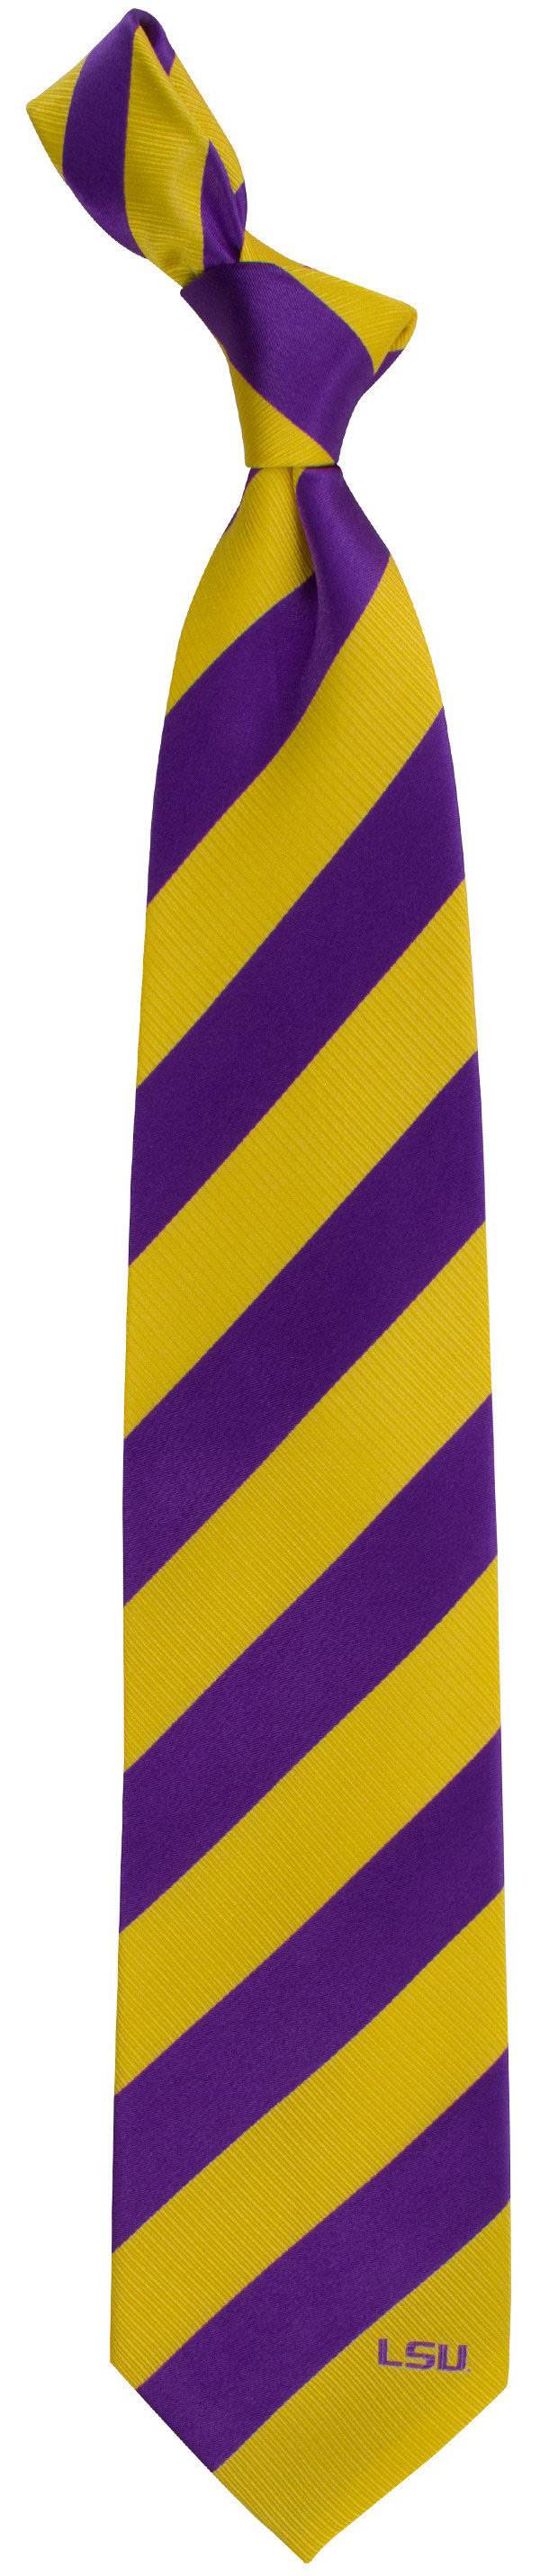 Eagles Wings LSU Tigers Woven Silk Necktie product image